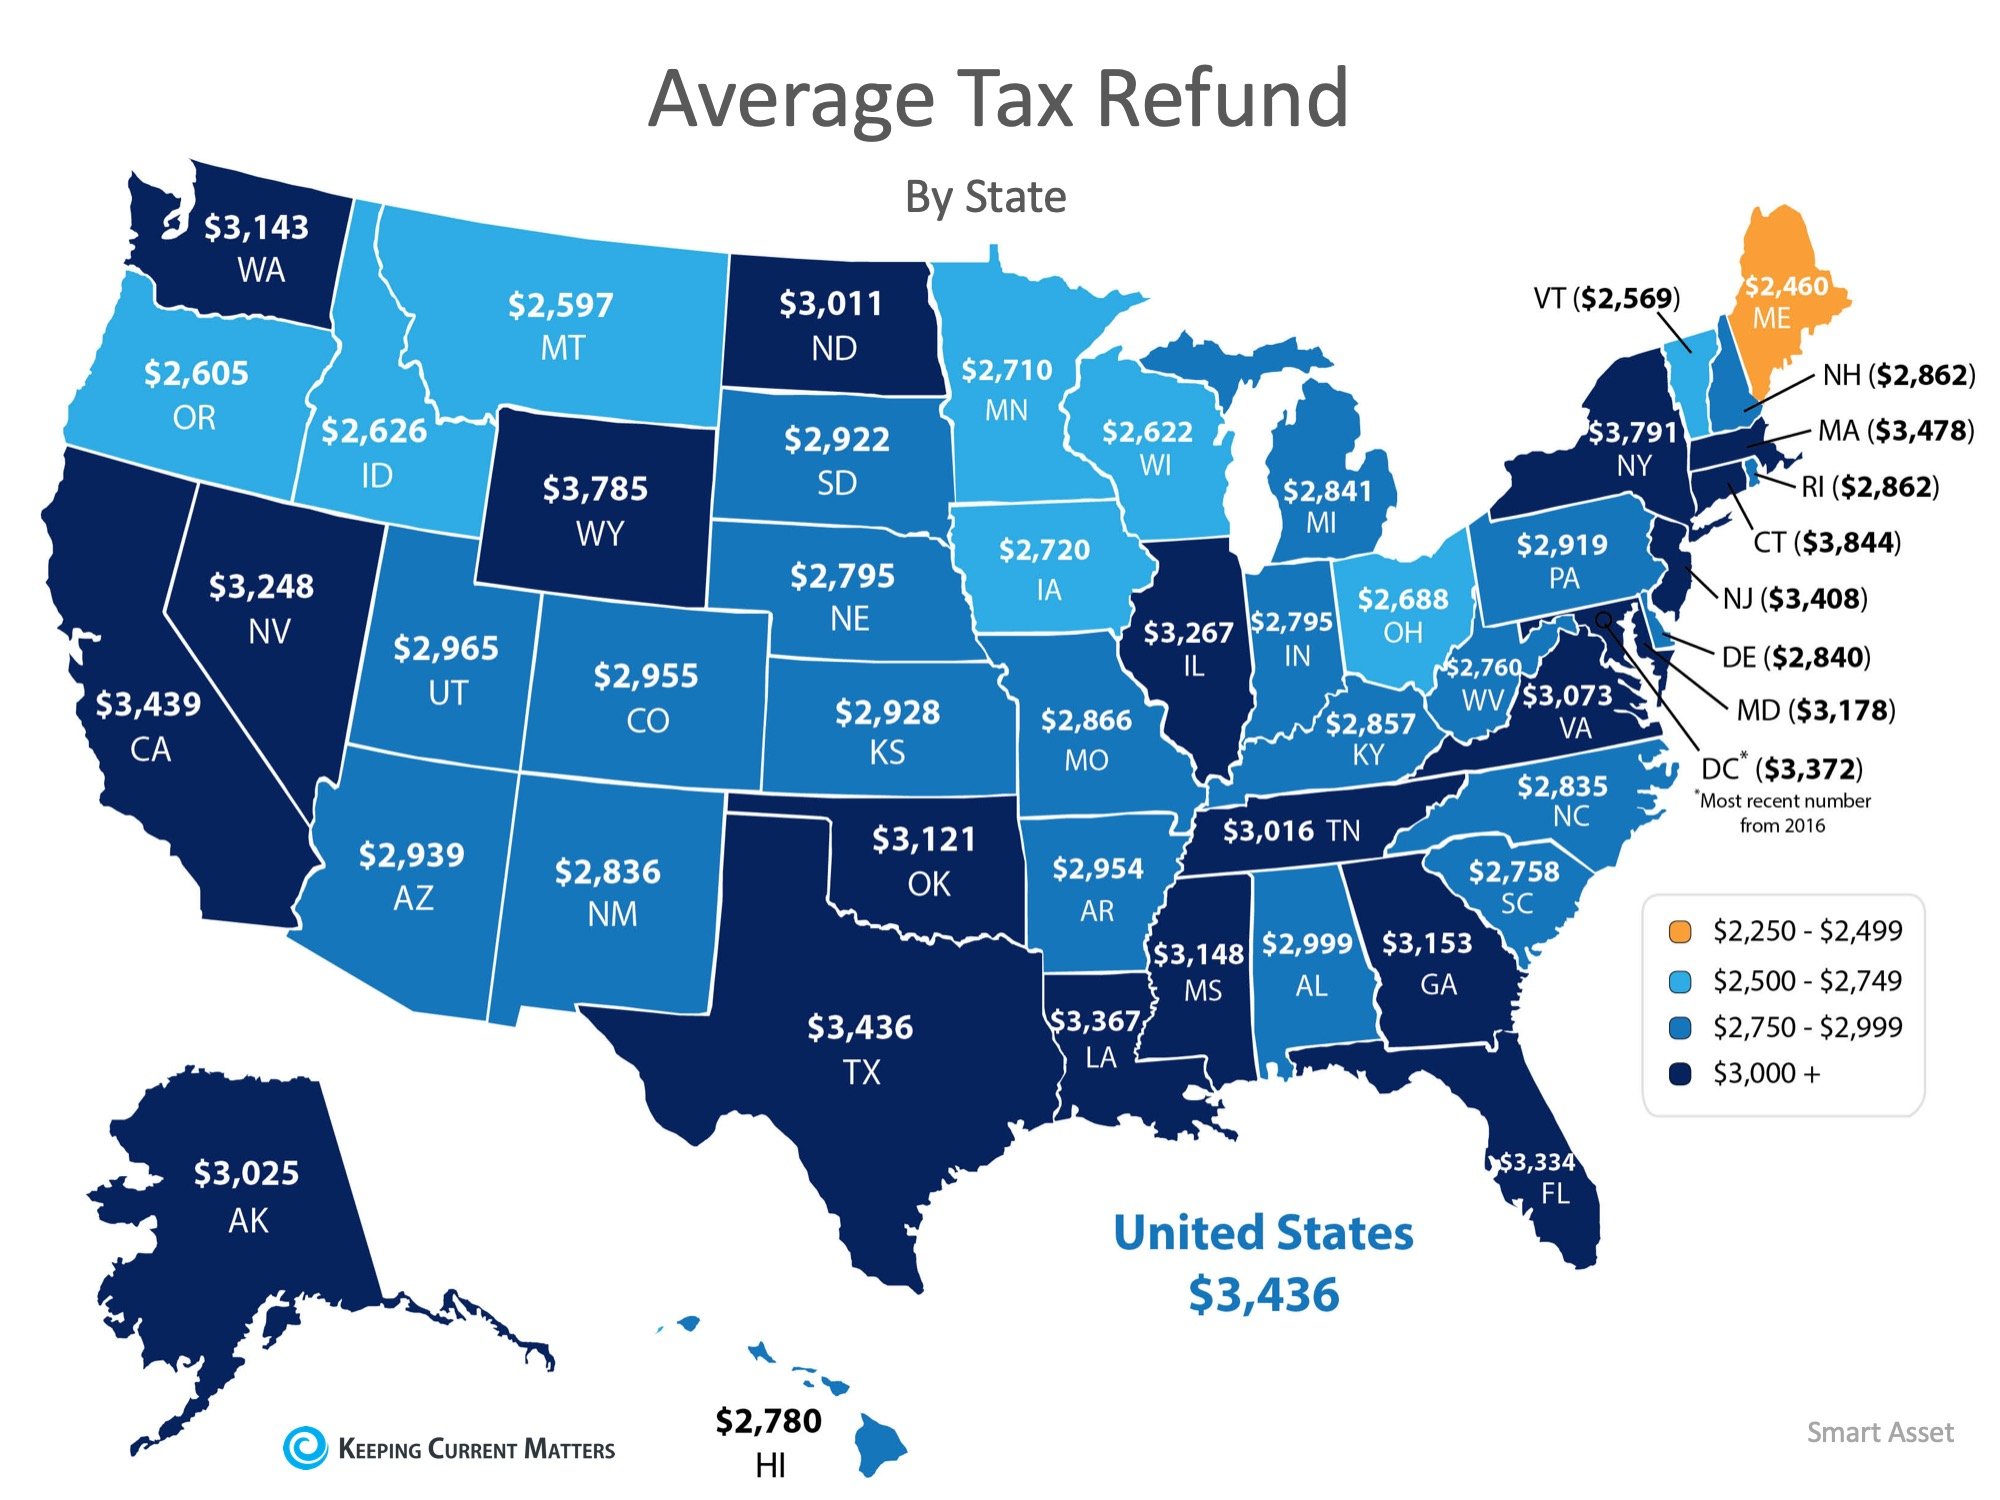 average-tax-refund-by-state-rice-miller-group-at-benchmark-realty